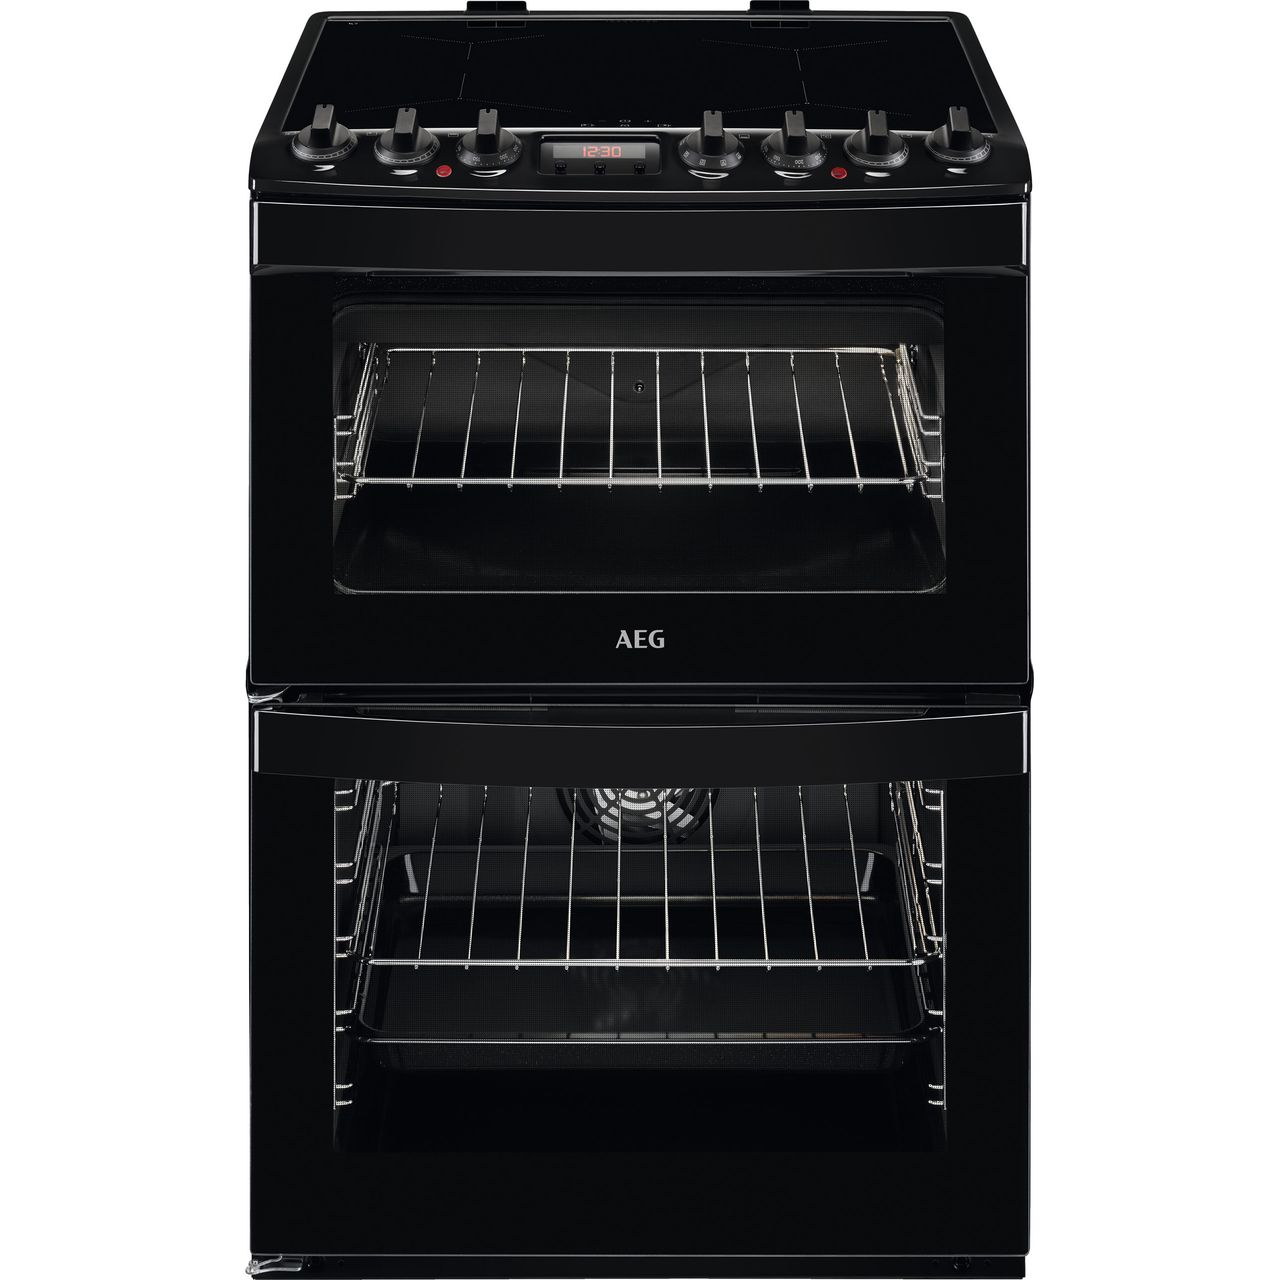 AEG CIB6740ACB 60cm Electric Cooker with Induction Hob Review